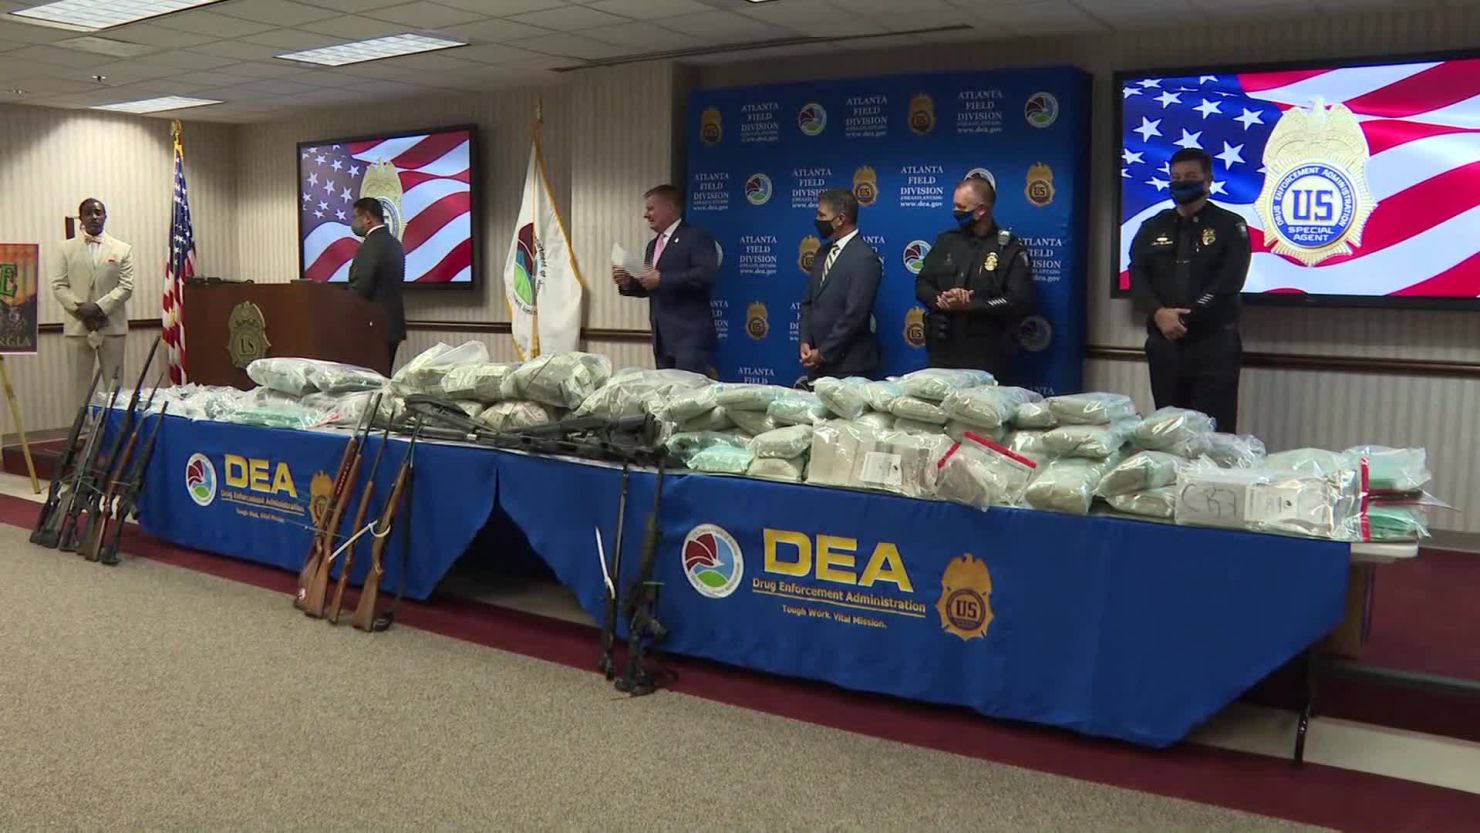 $8 million in drugs seized in largest heroin bust in Georgia's